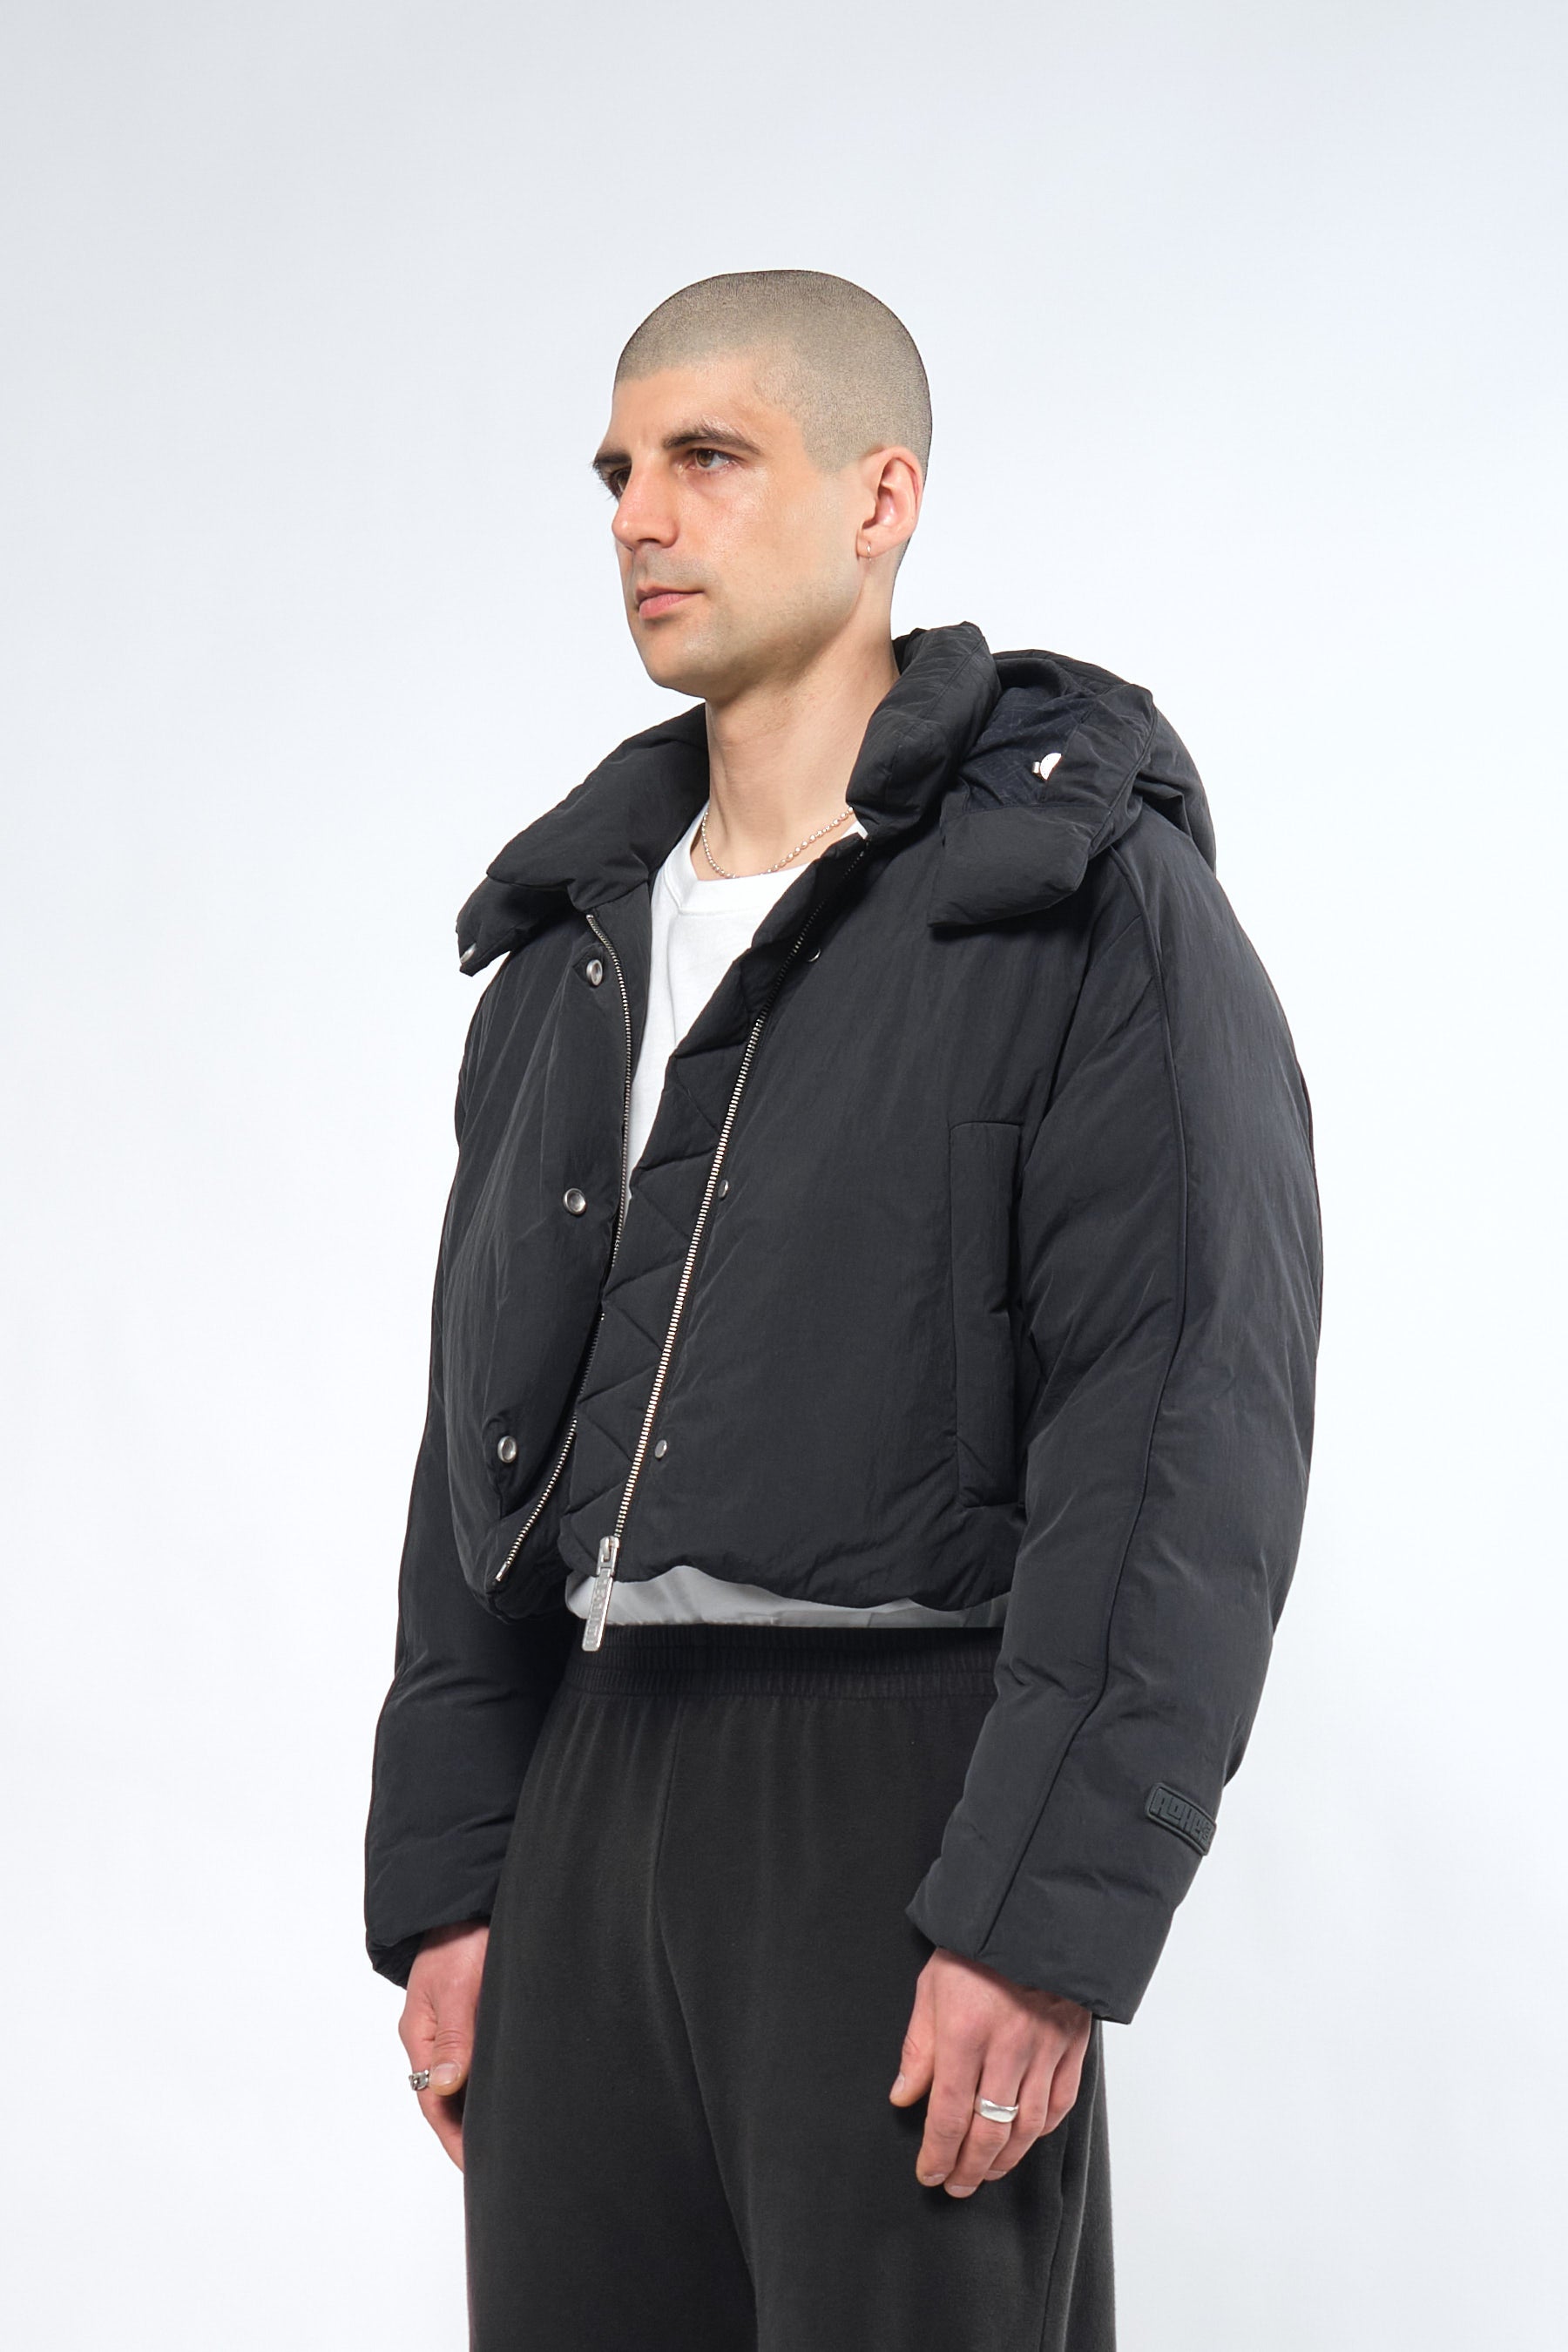  Re:Down® Crop Black Puffer Jacket with Hood - Adhere To  - 5